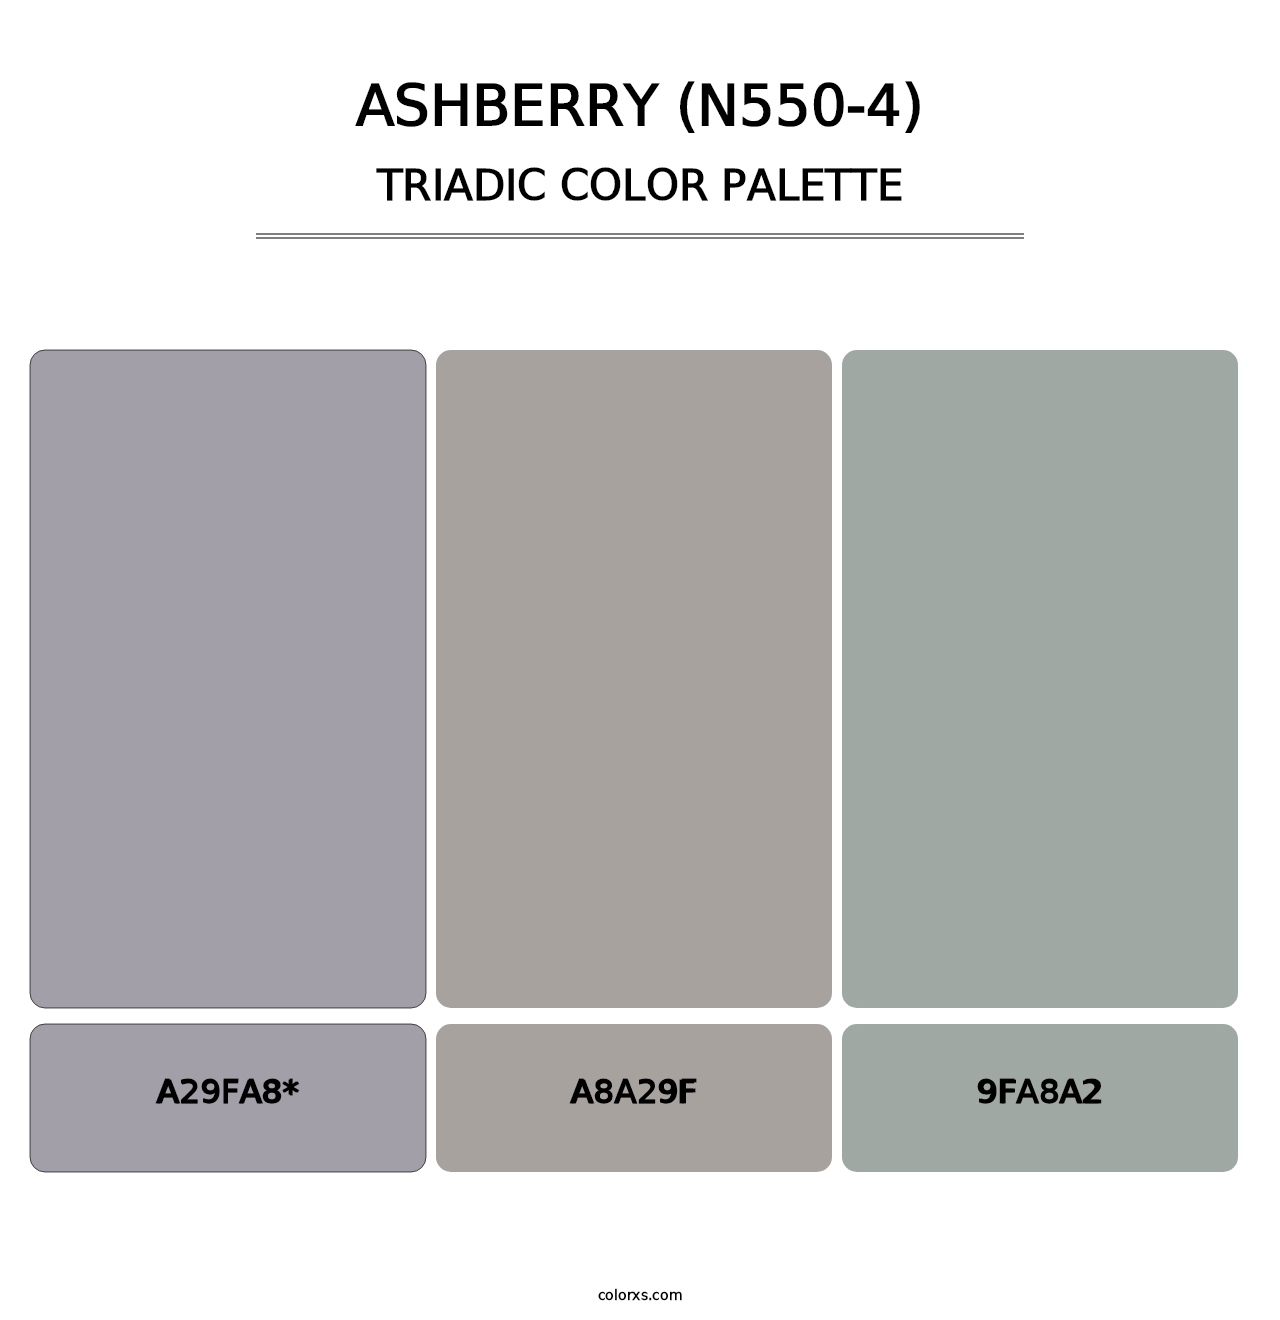 Ashberry (N550-4) - Triadic Color Palette